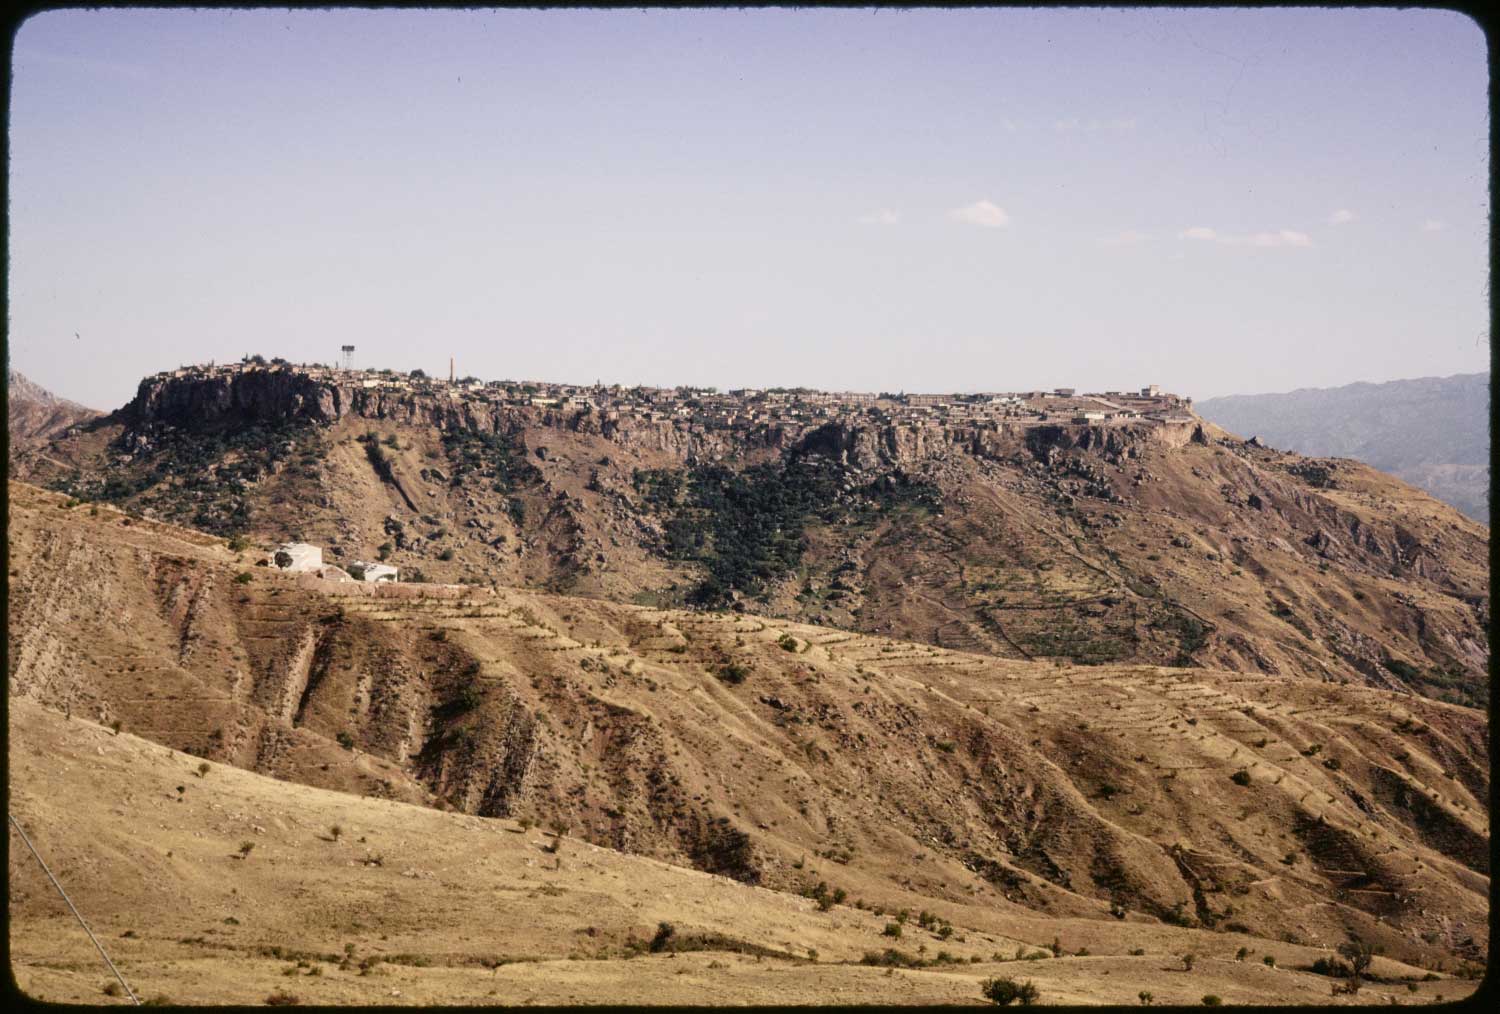 Distant view of village of Amadiyya in the Dohuk Province of Iraq.